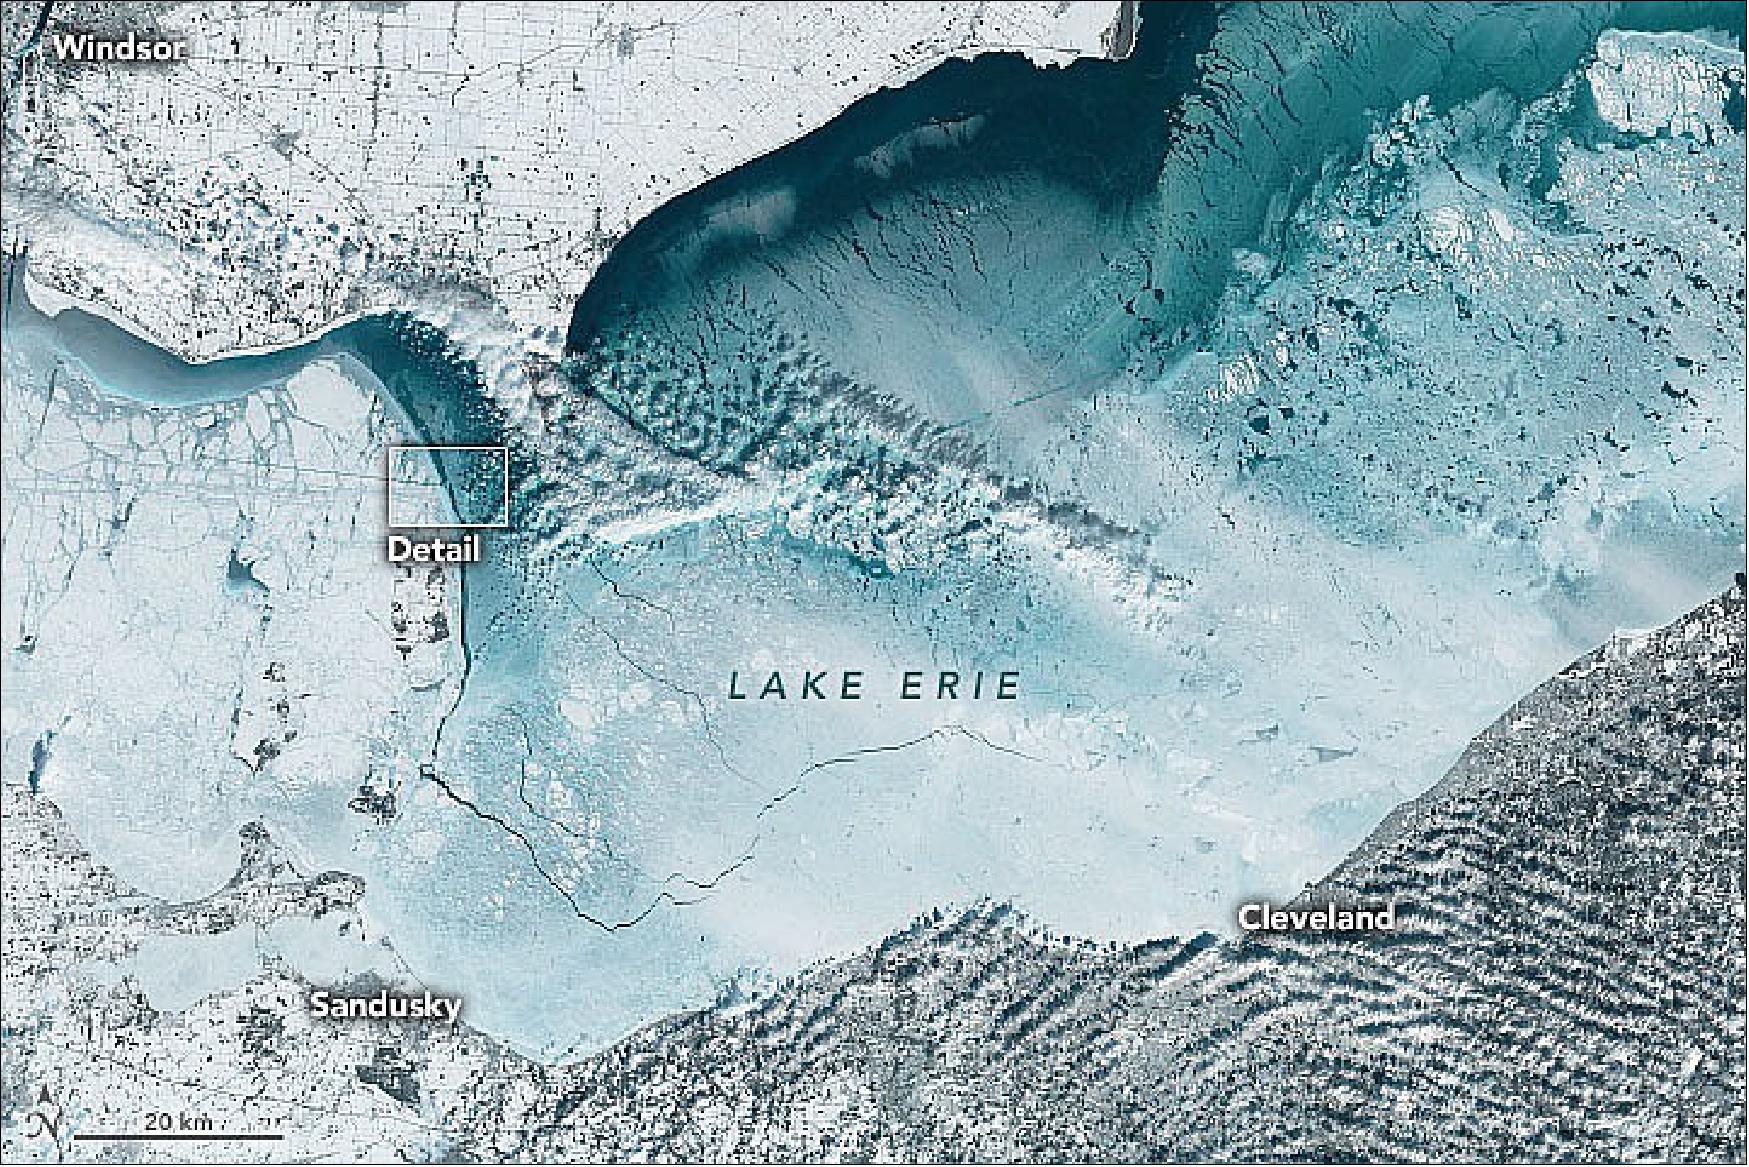 Figure 78: The images of Lake Erie were acquired by the OLI instrument on the Landsat 8 satellite on February 5. This image shows the boundary between Lake Erie’s shallower western basin and deeper central basin north of Sandusky Bay (image credit: NASA Earth Observatory images by Joshua Stevens, using Landsat data from the U.S. Geological Survey. Story by Sara E. Pratt)